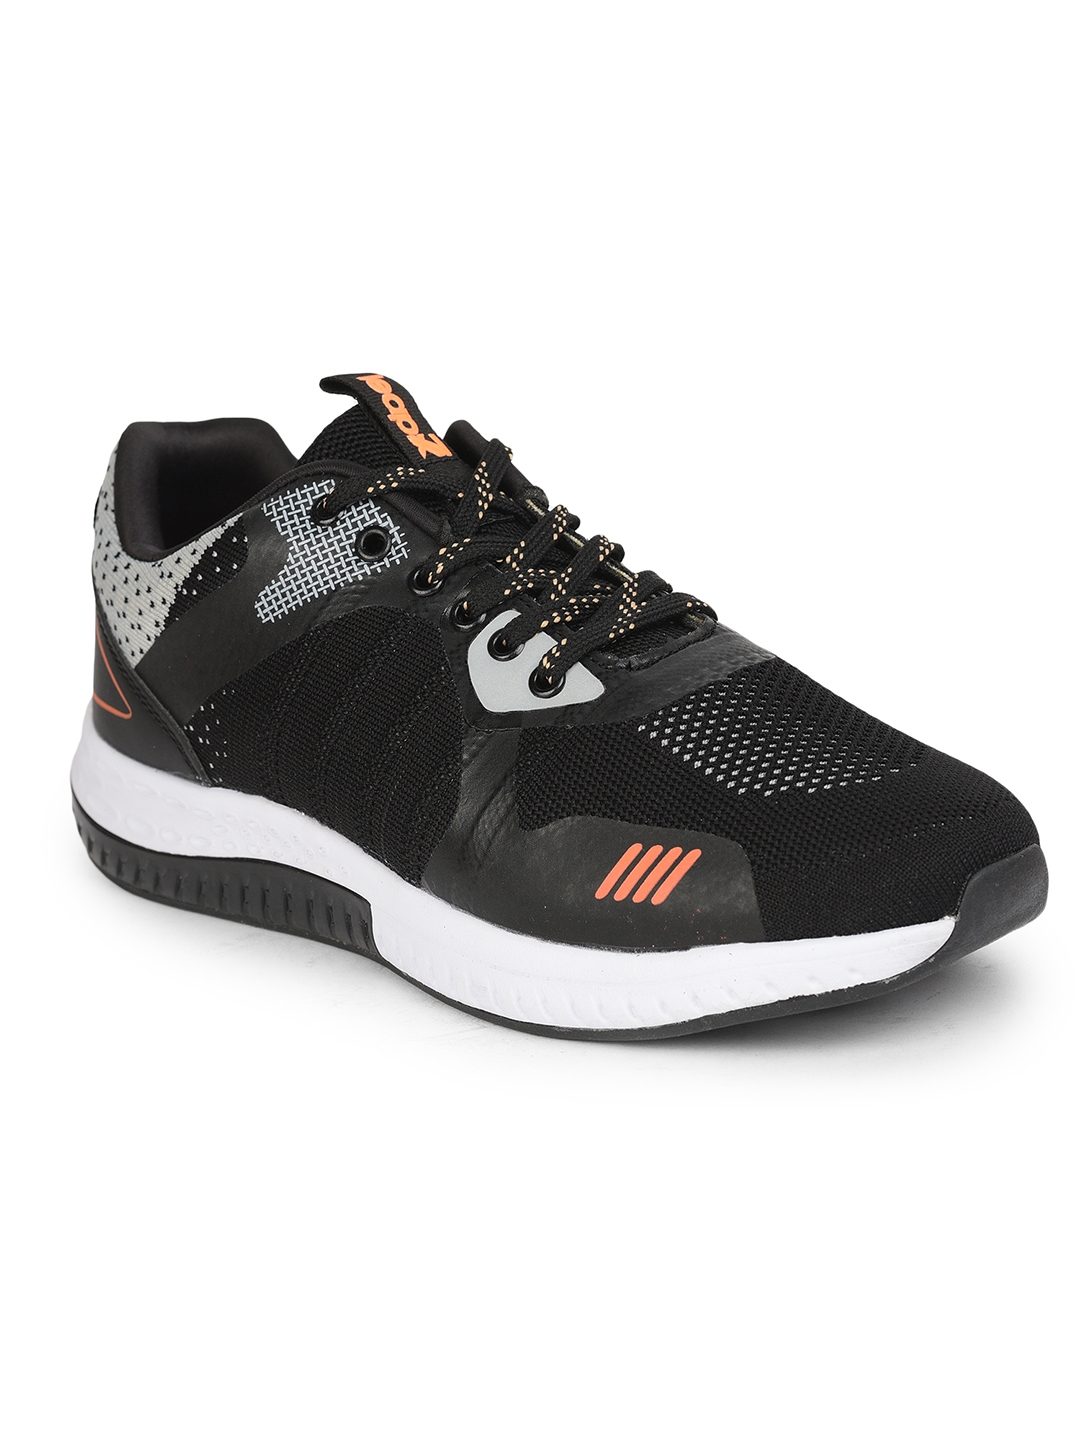 Liberty | LEAP7X by Liberty Grey Running Shoes ROMAN-01 For :- Men